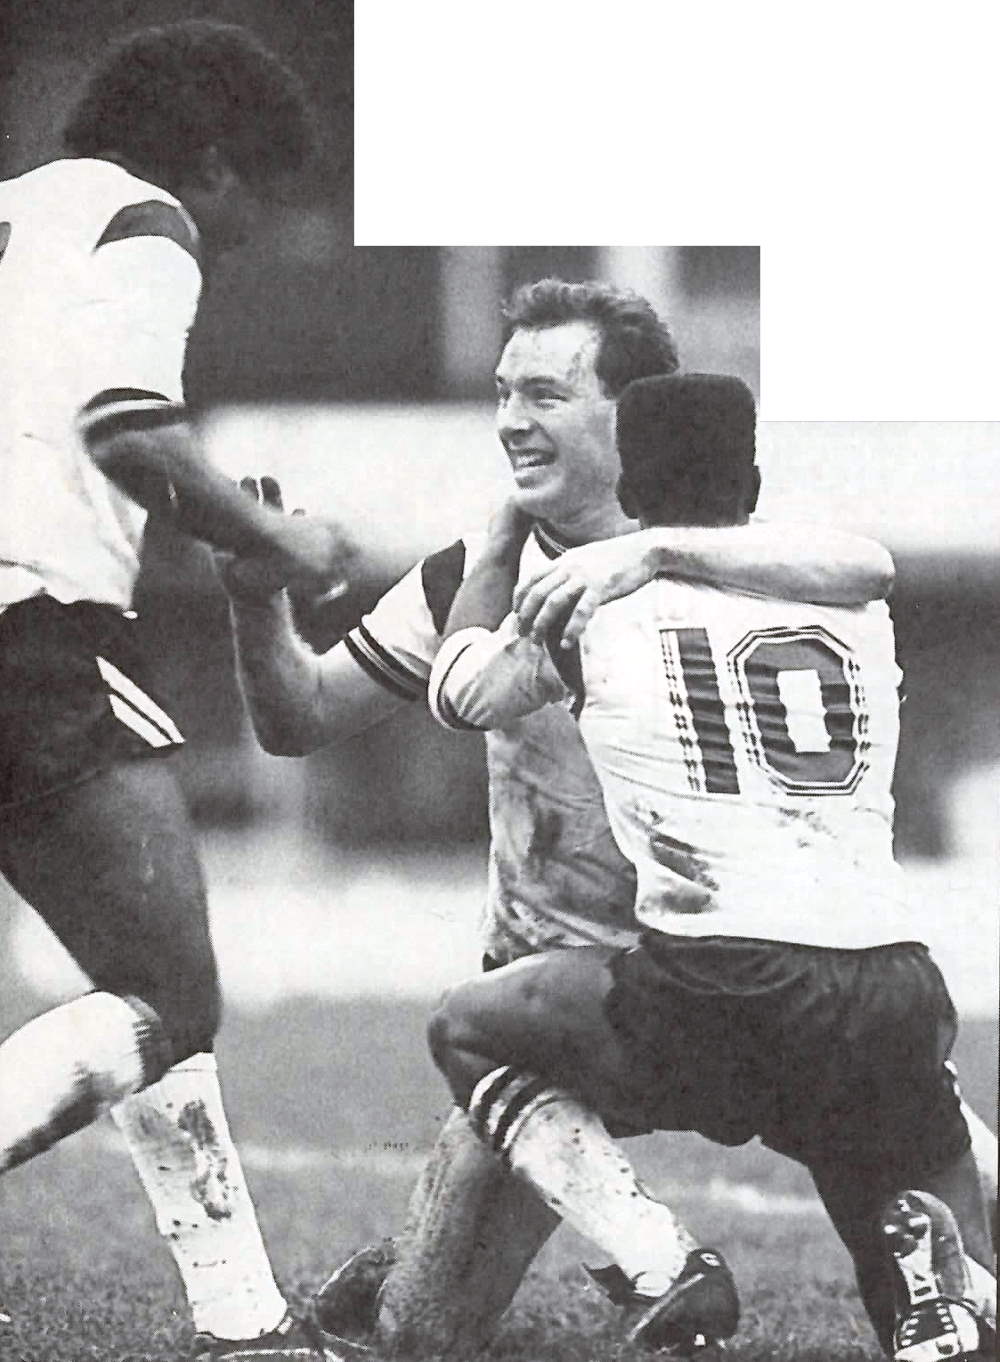 Phil Sproson celebrates his goal against Spurs in the FA Cup, 1988